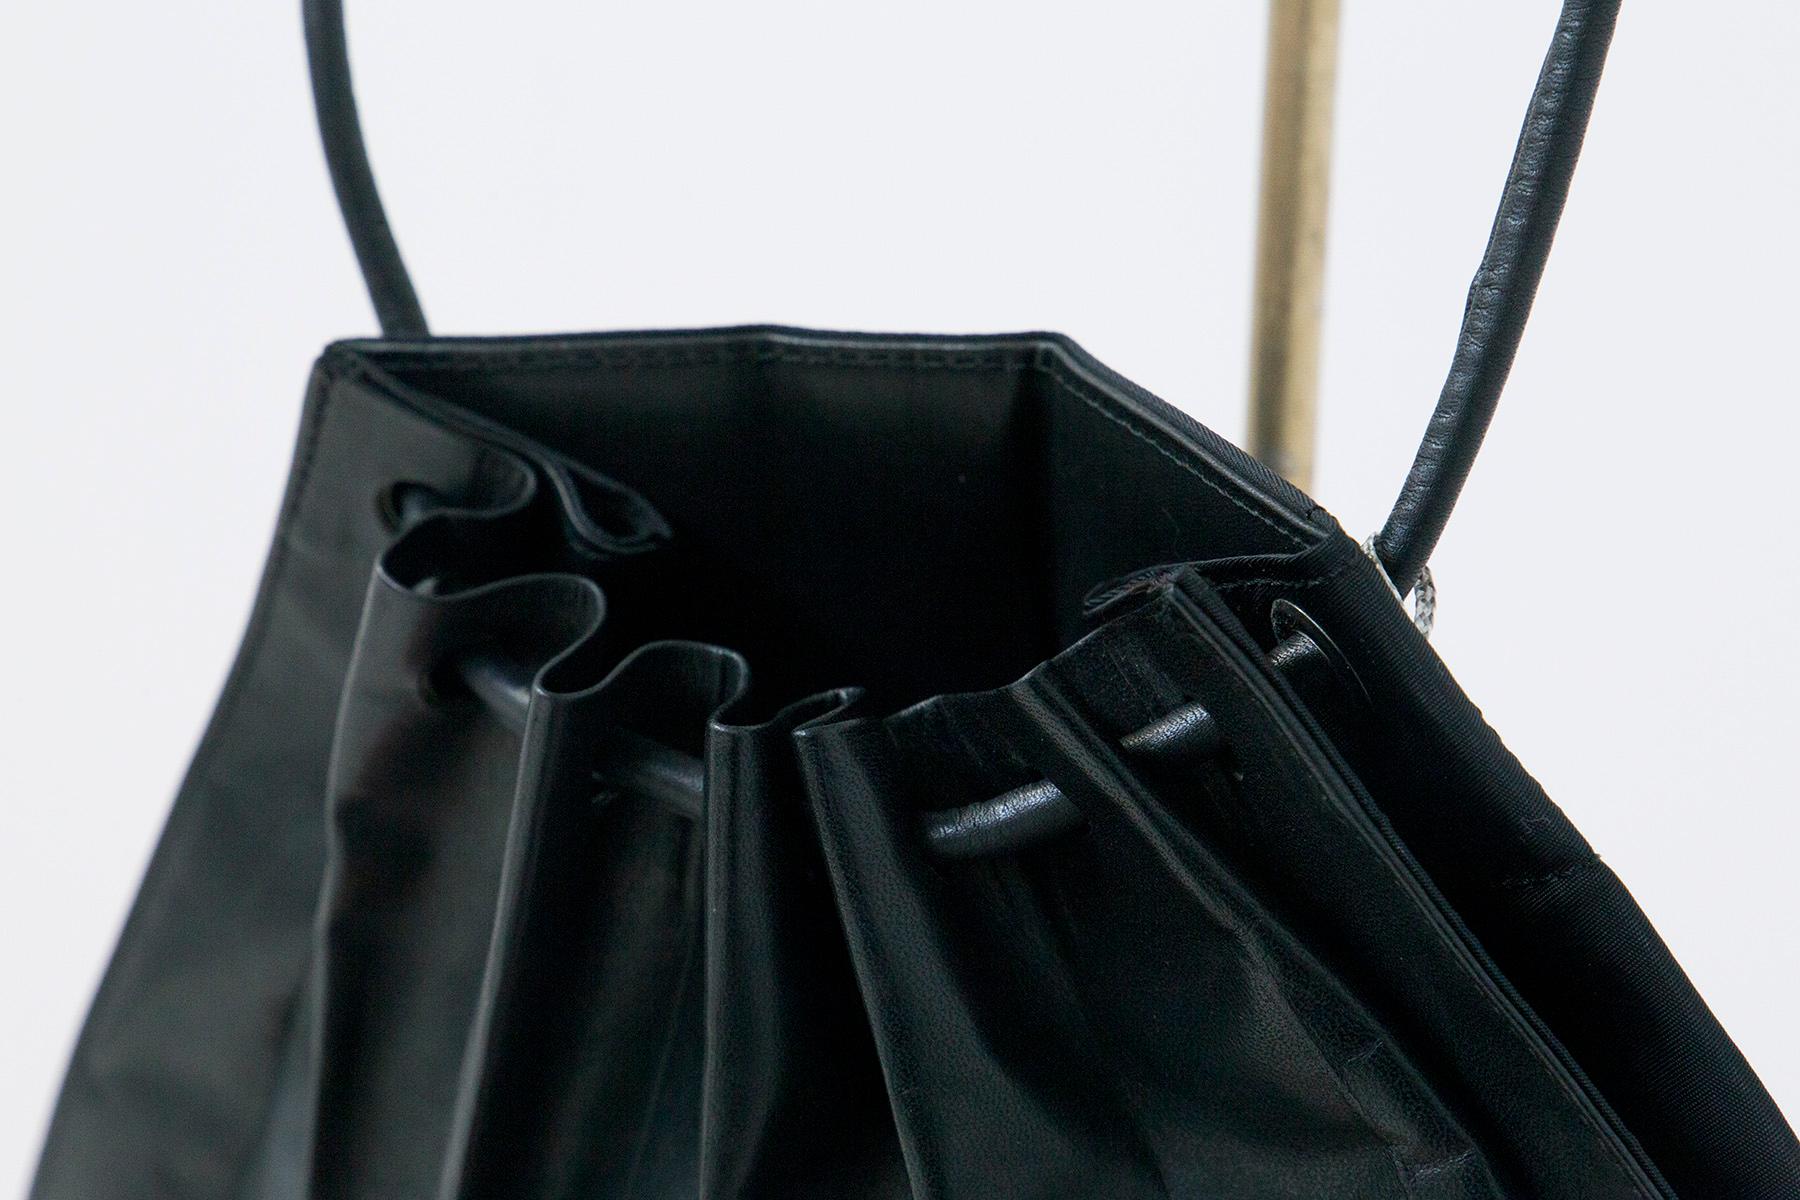 Beautiful black leather bag with characteristic pleating created by Issey Miyake (1938 - 2022) in the 1990s.
The bag is suitable for both daytime and evening events, as leather lends elegance to any time of day. This bag has 8a trapezoidal central